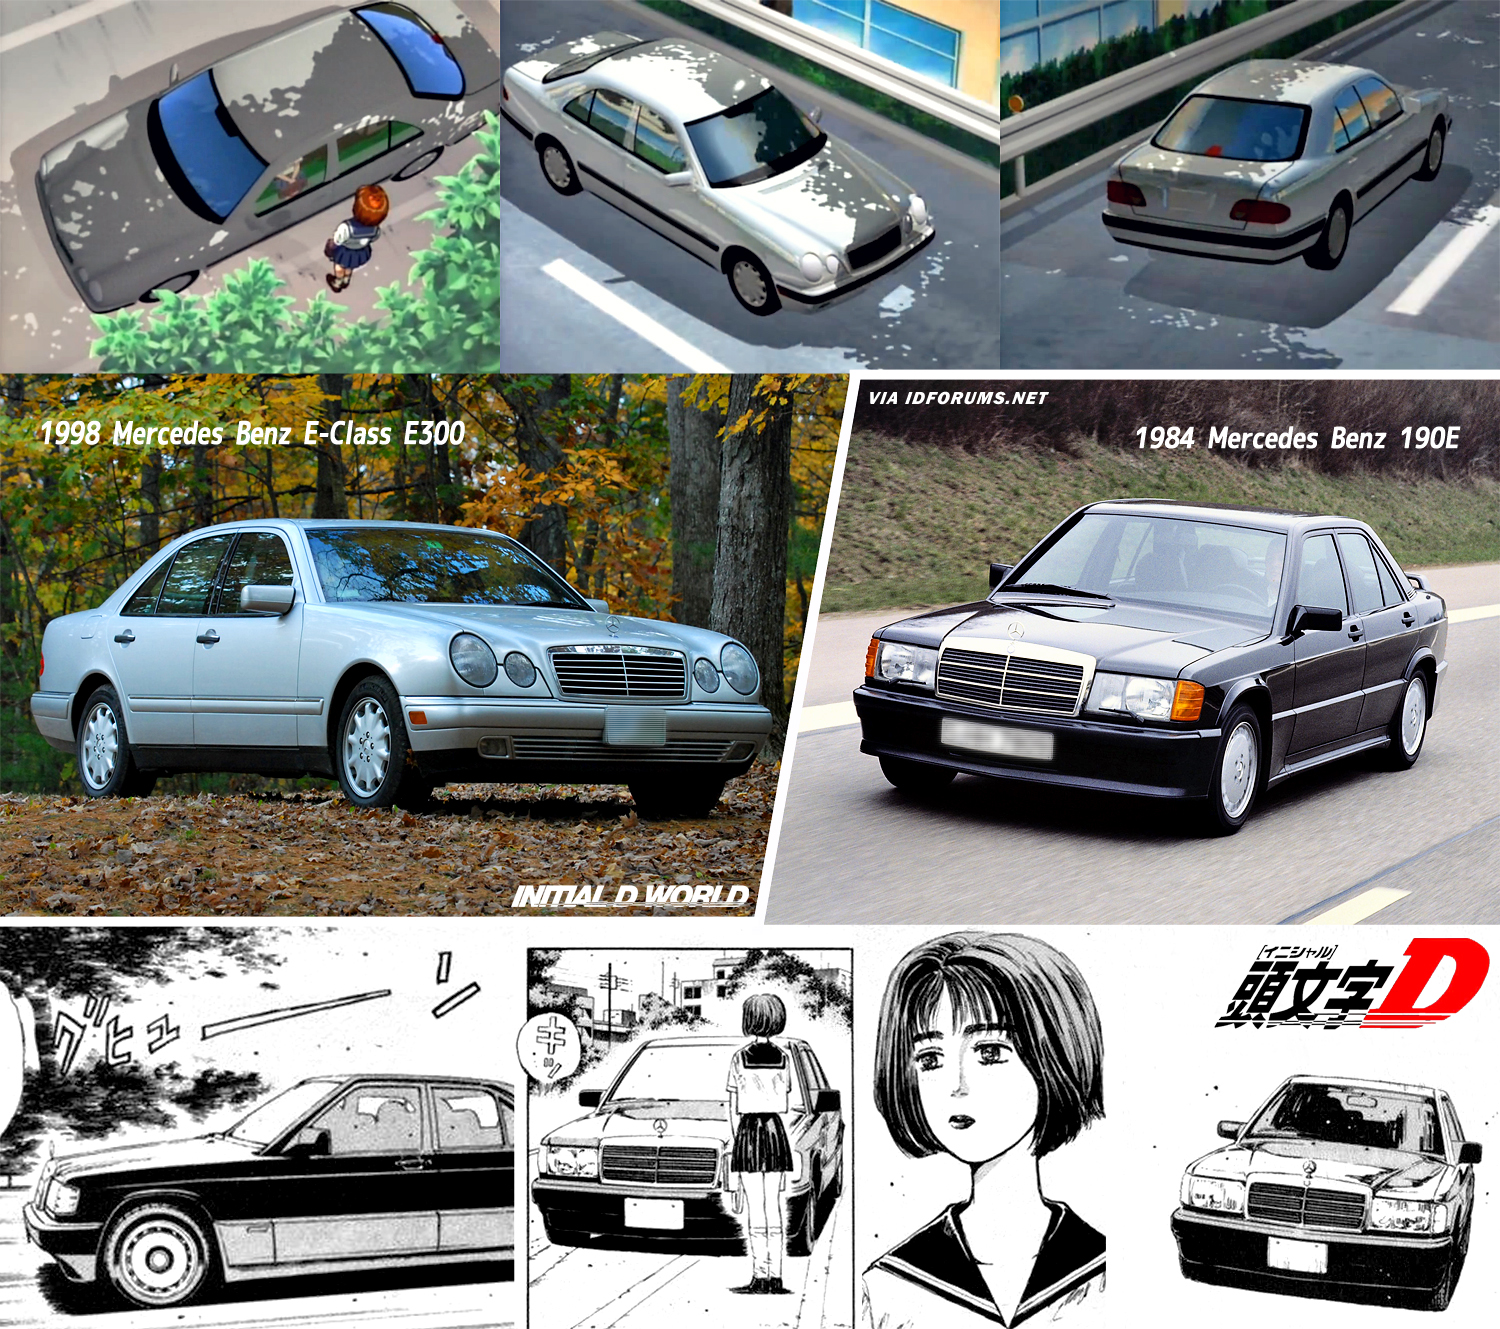 Initial D World - Discussion Board / Forums -> Papa's Benz manga